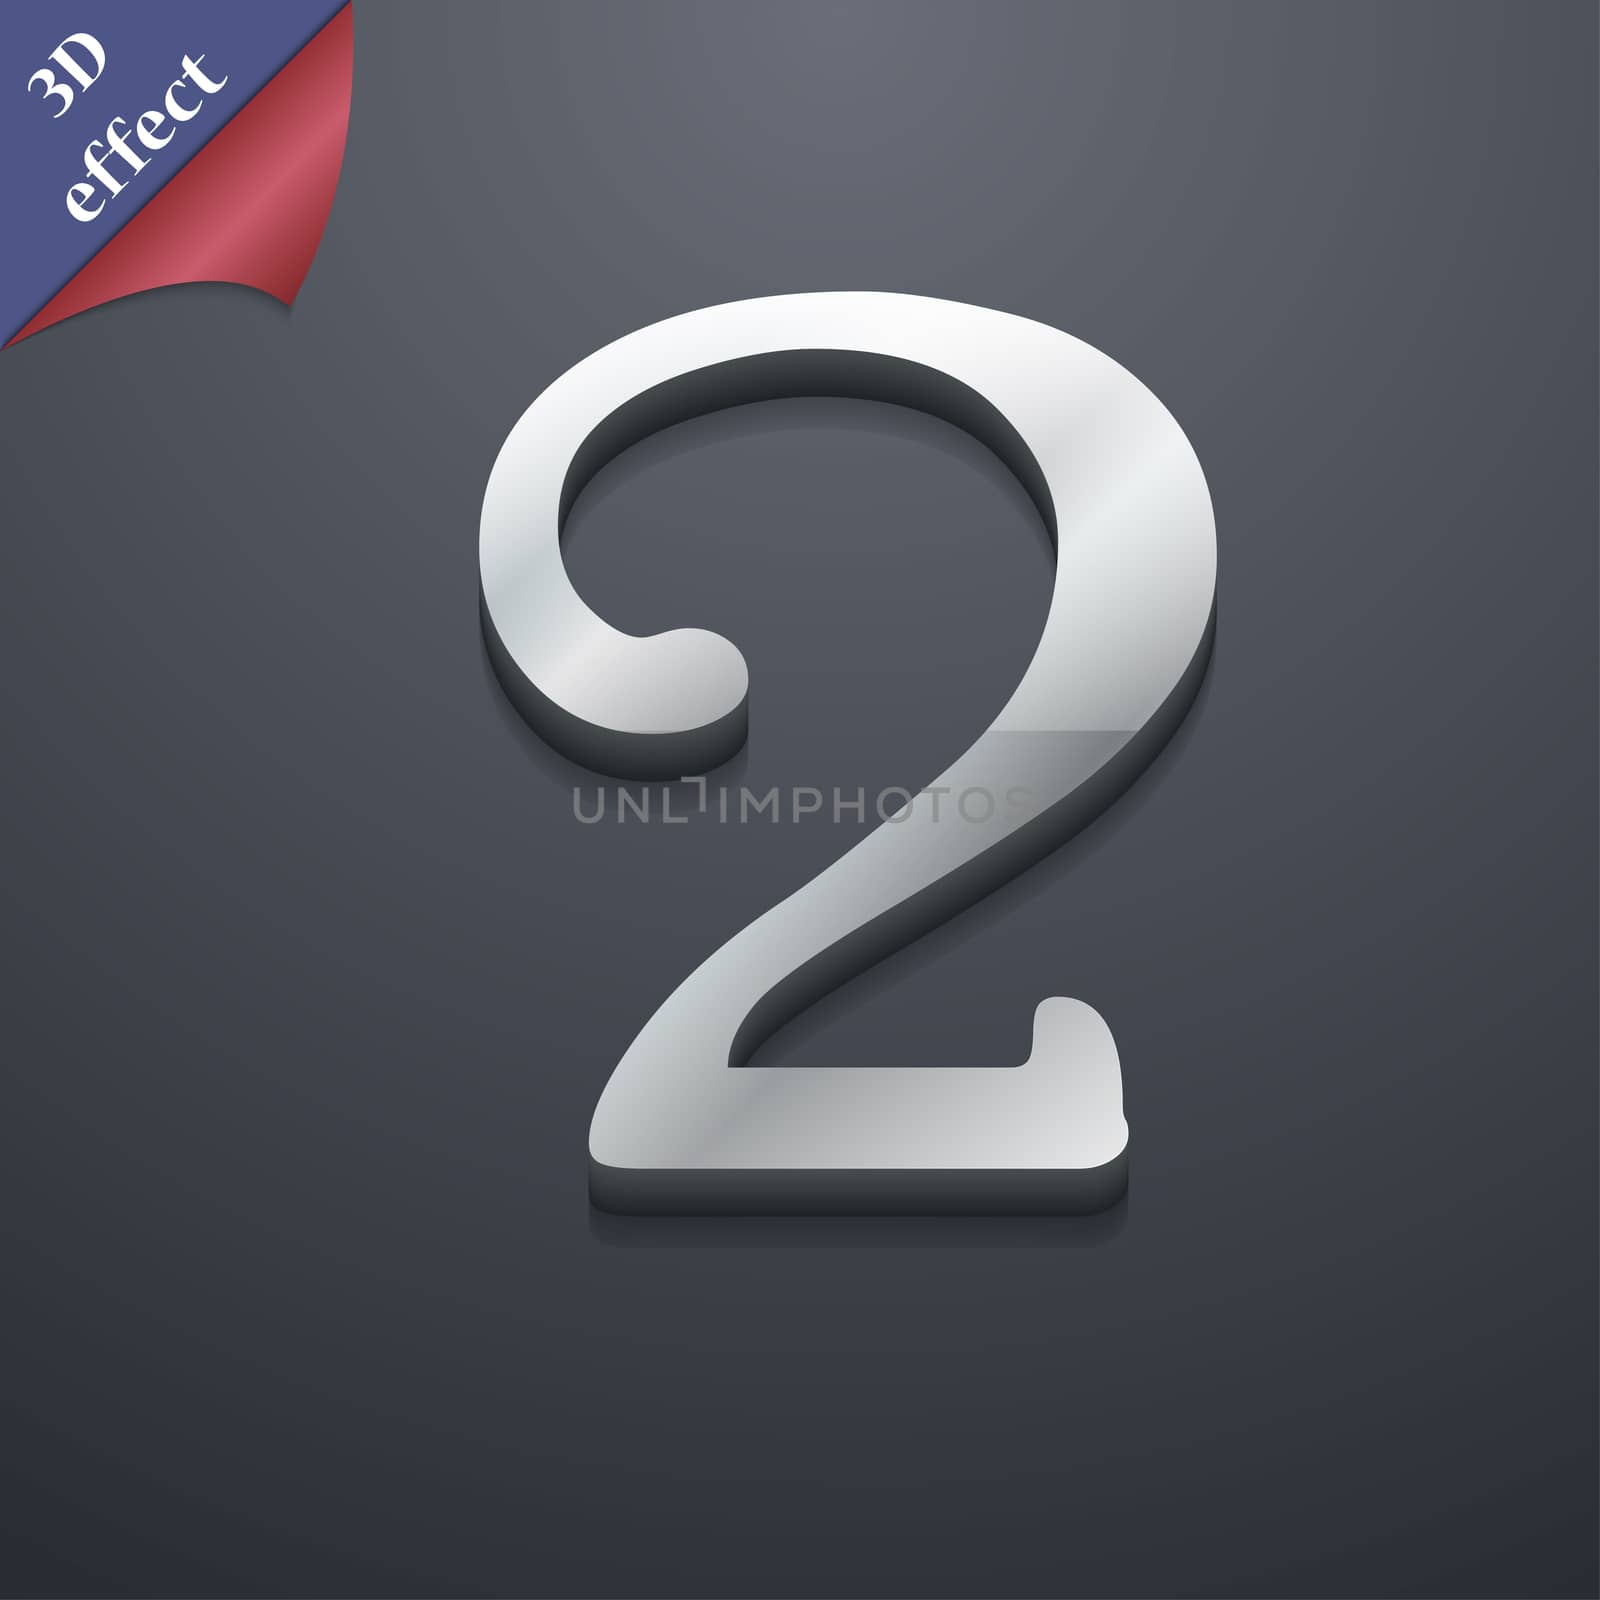 number two icon symbol. 3D style. Trendy, modern design with space for your text illustration. Rastrized copy